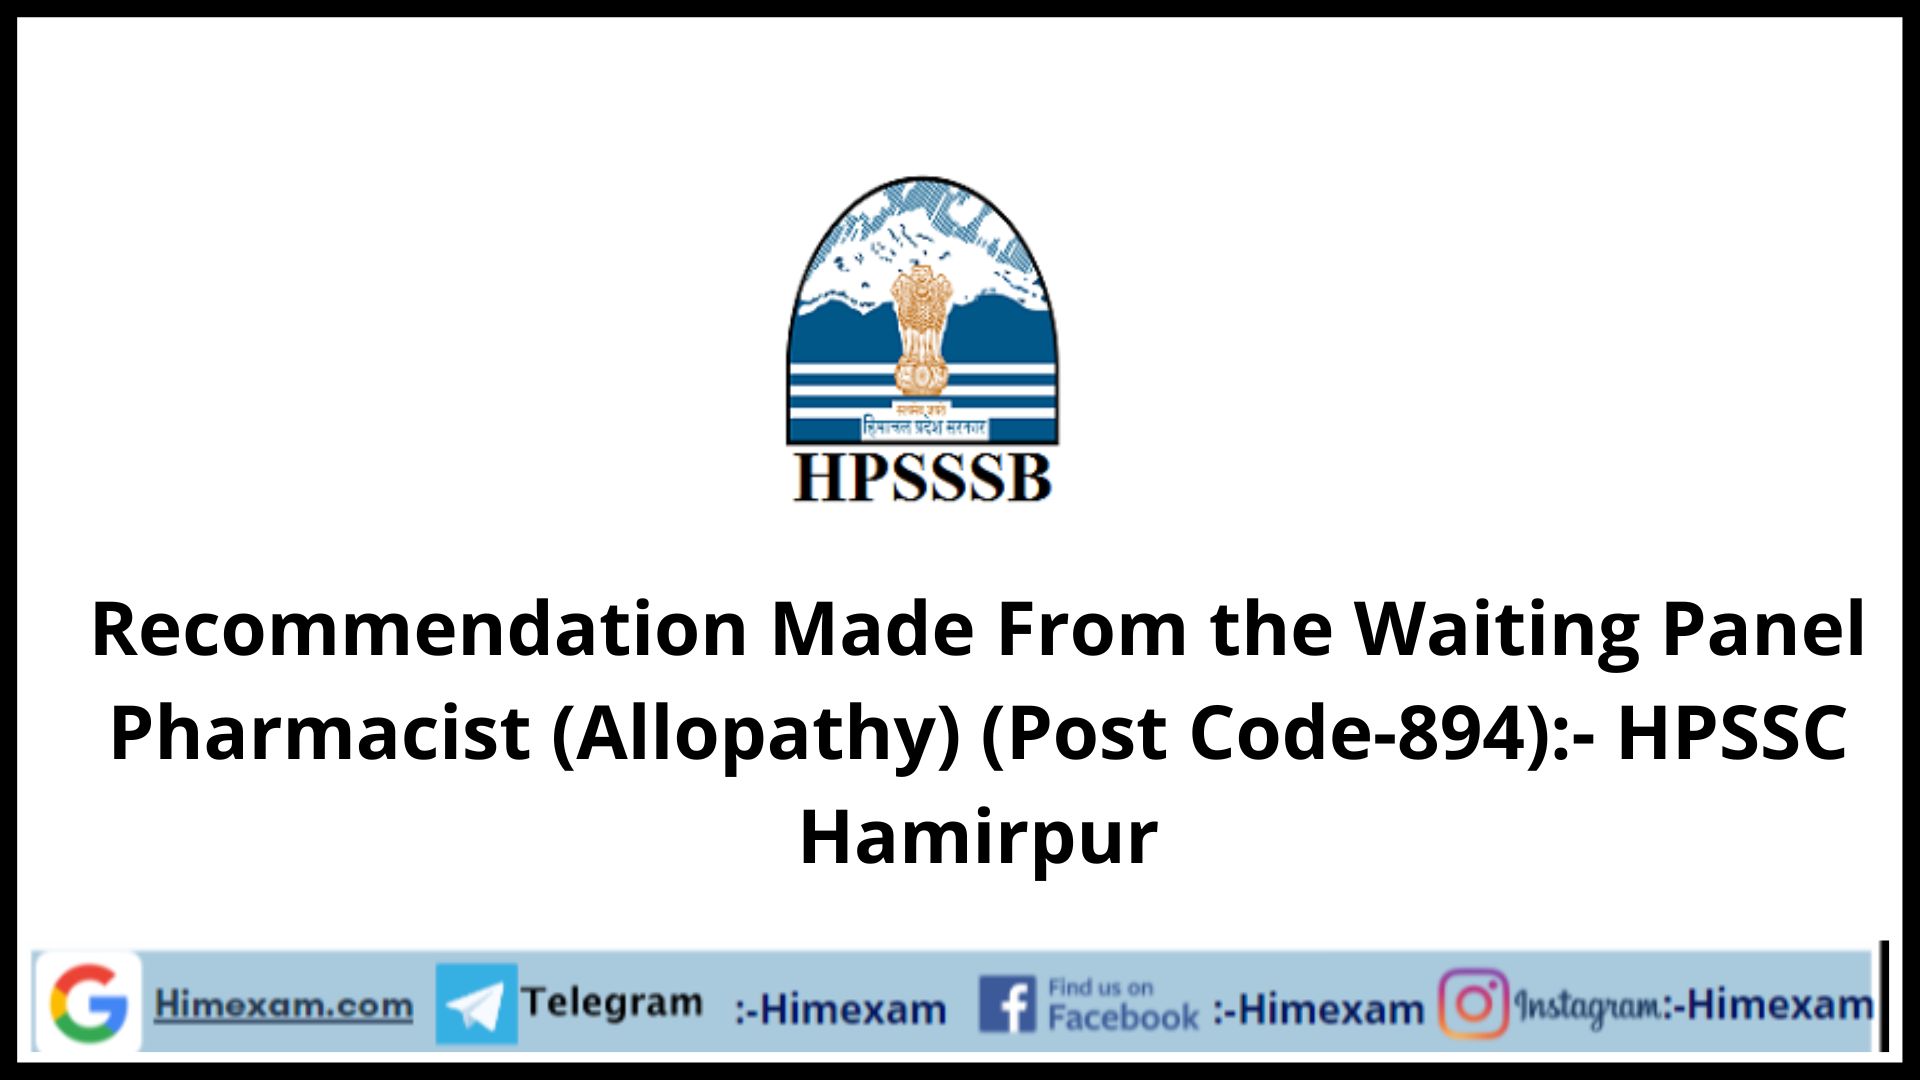 Recommendation Made From the Waiting Panel  Pharmacist (Allopathy) (Post Code-894):- HPSSC Hamirpur